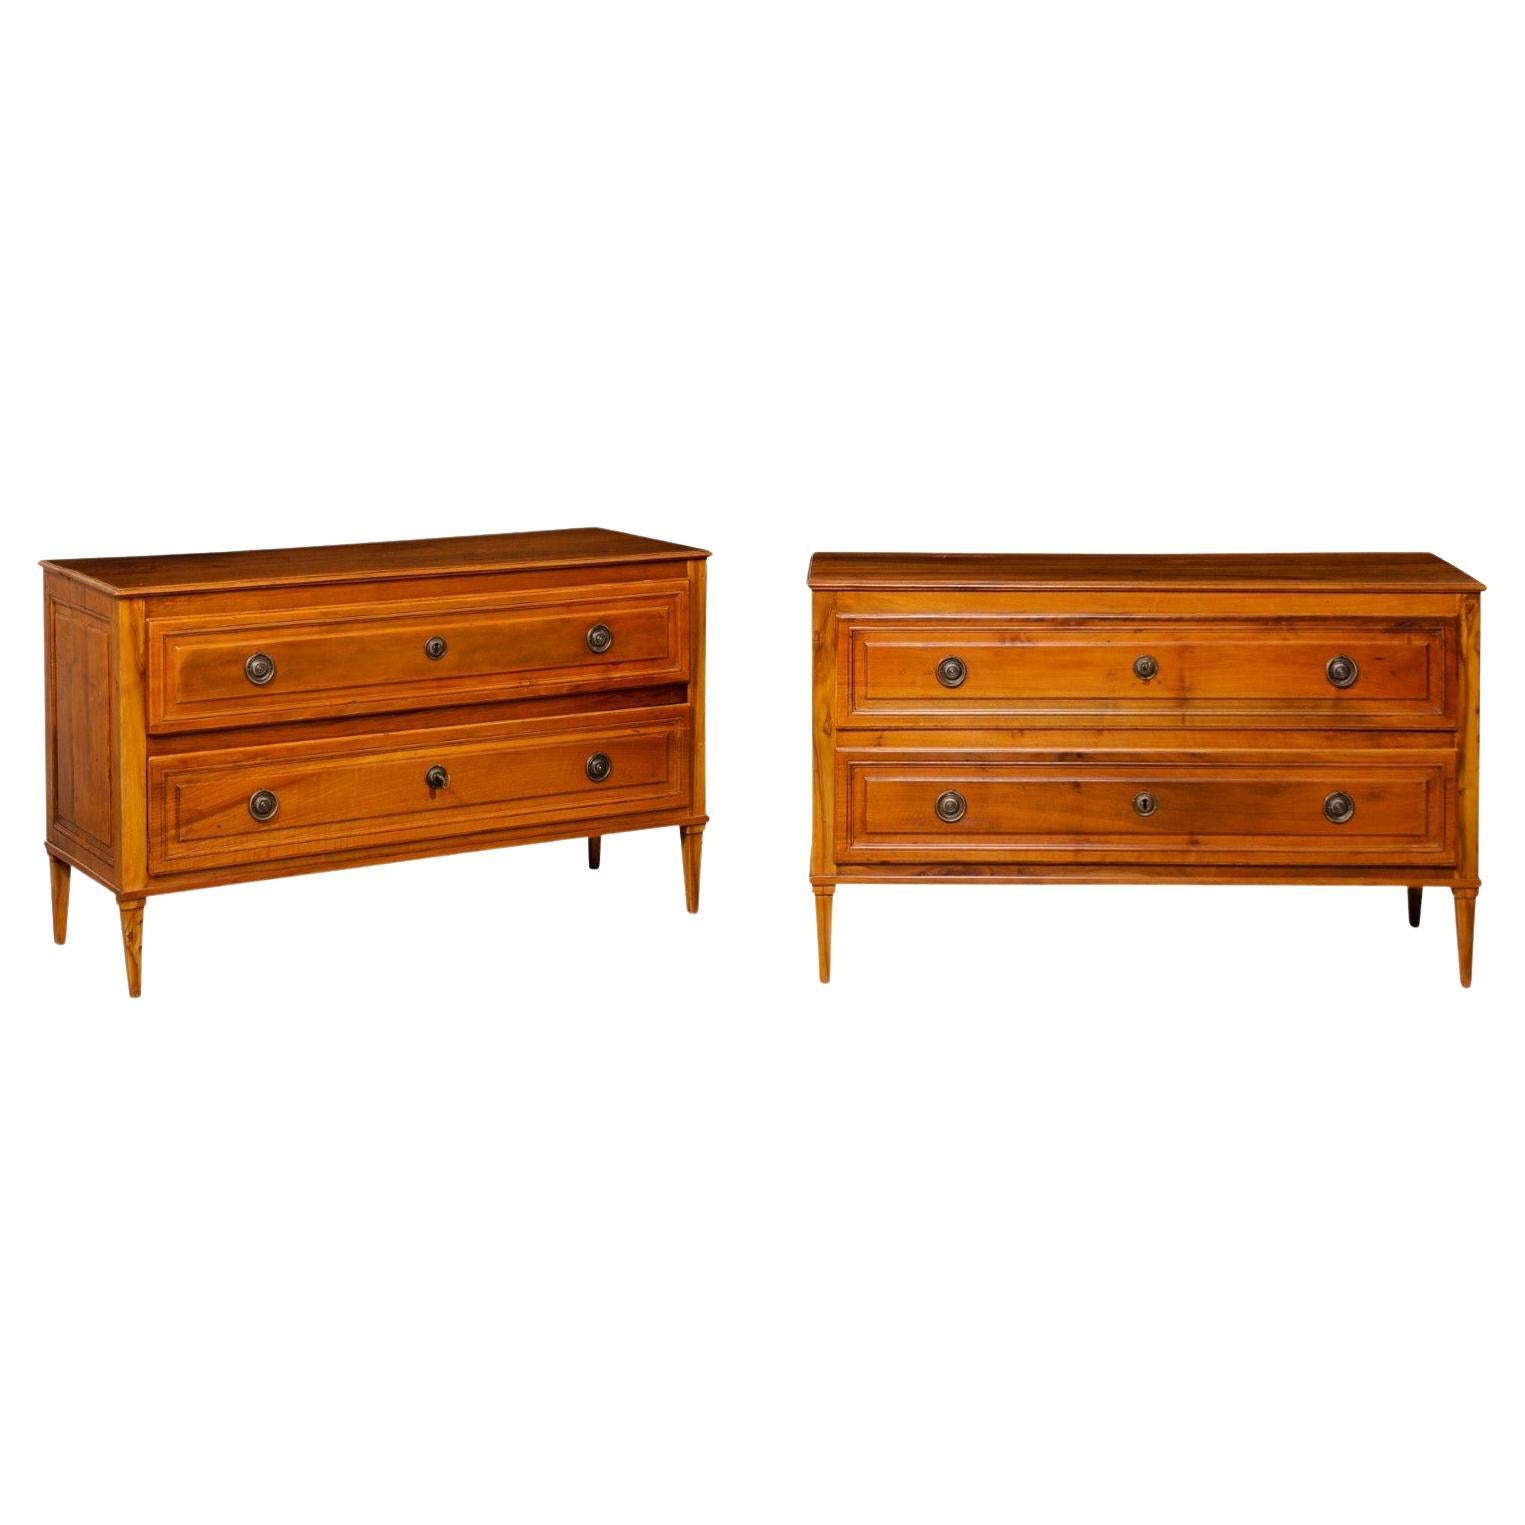 A Fabulous Pair of Italian Late 18th C. Two-Drawer Cassetteire, Over 4 Ft. Long For Sale